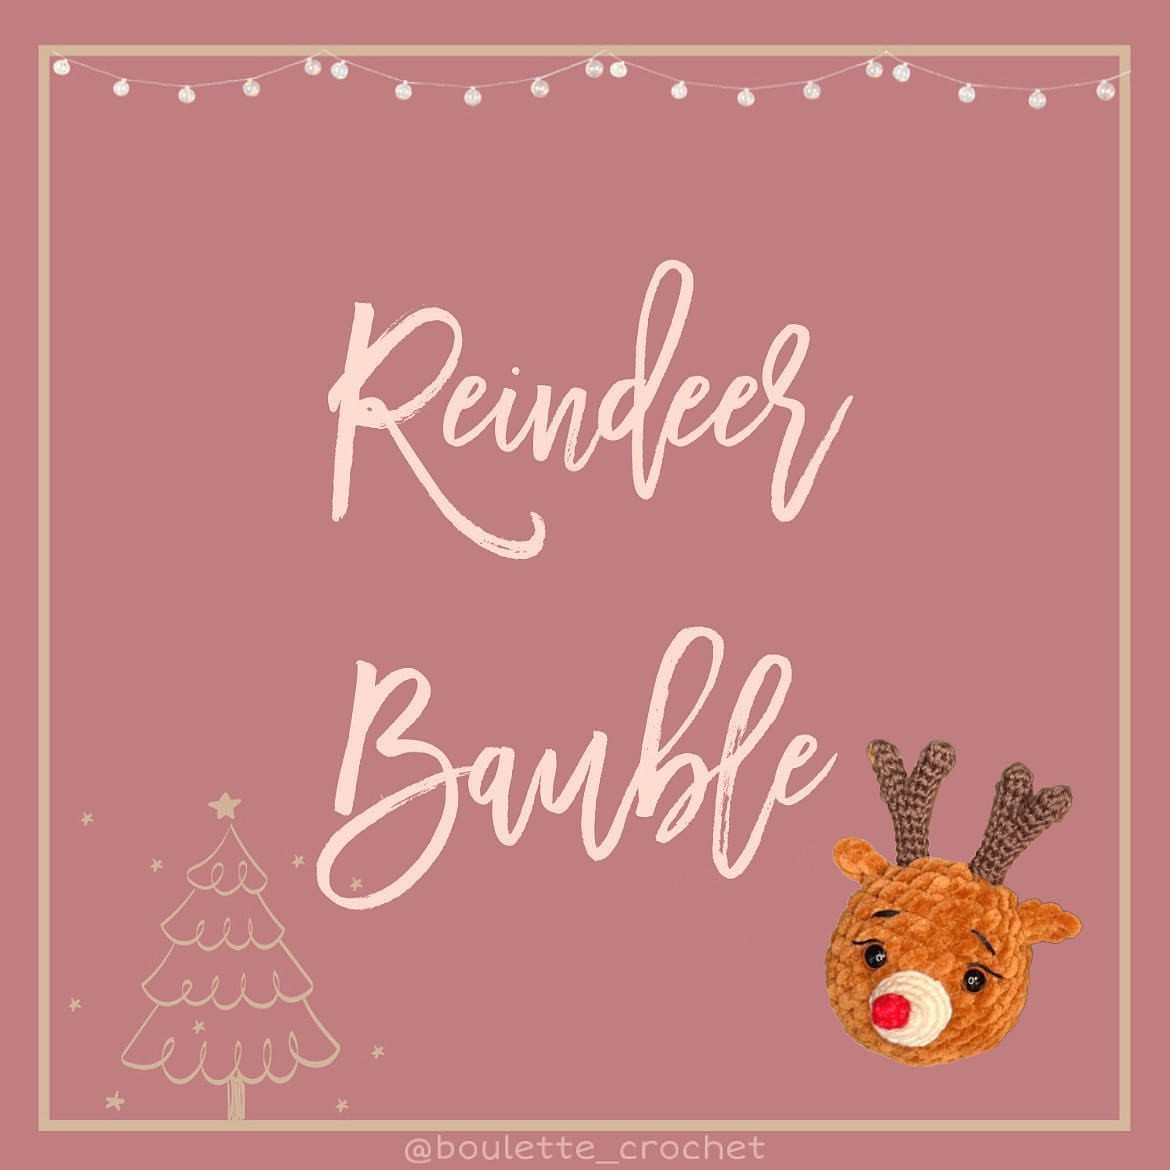 your reindeer bauble is ready.